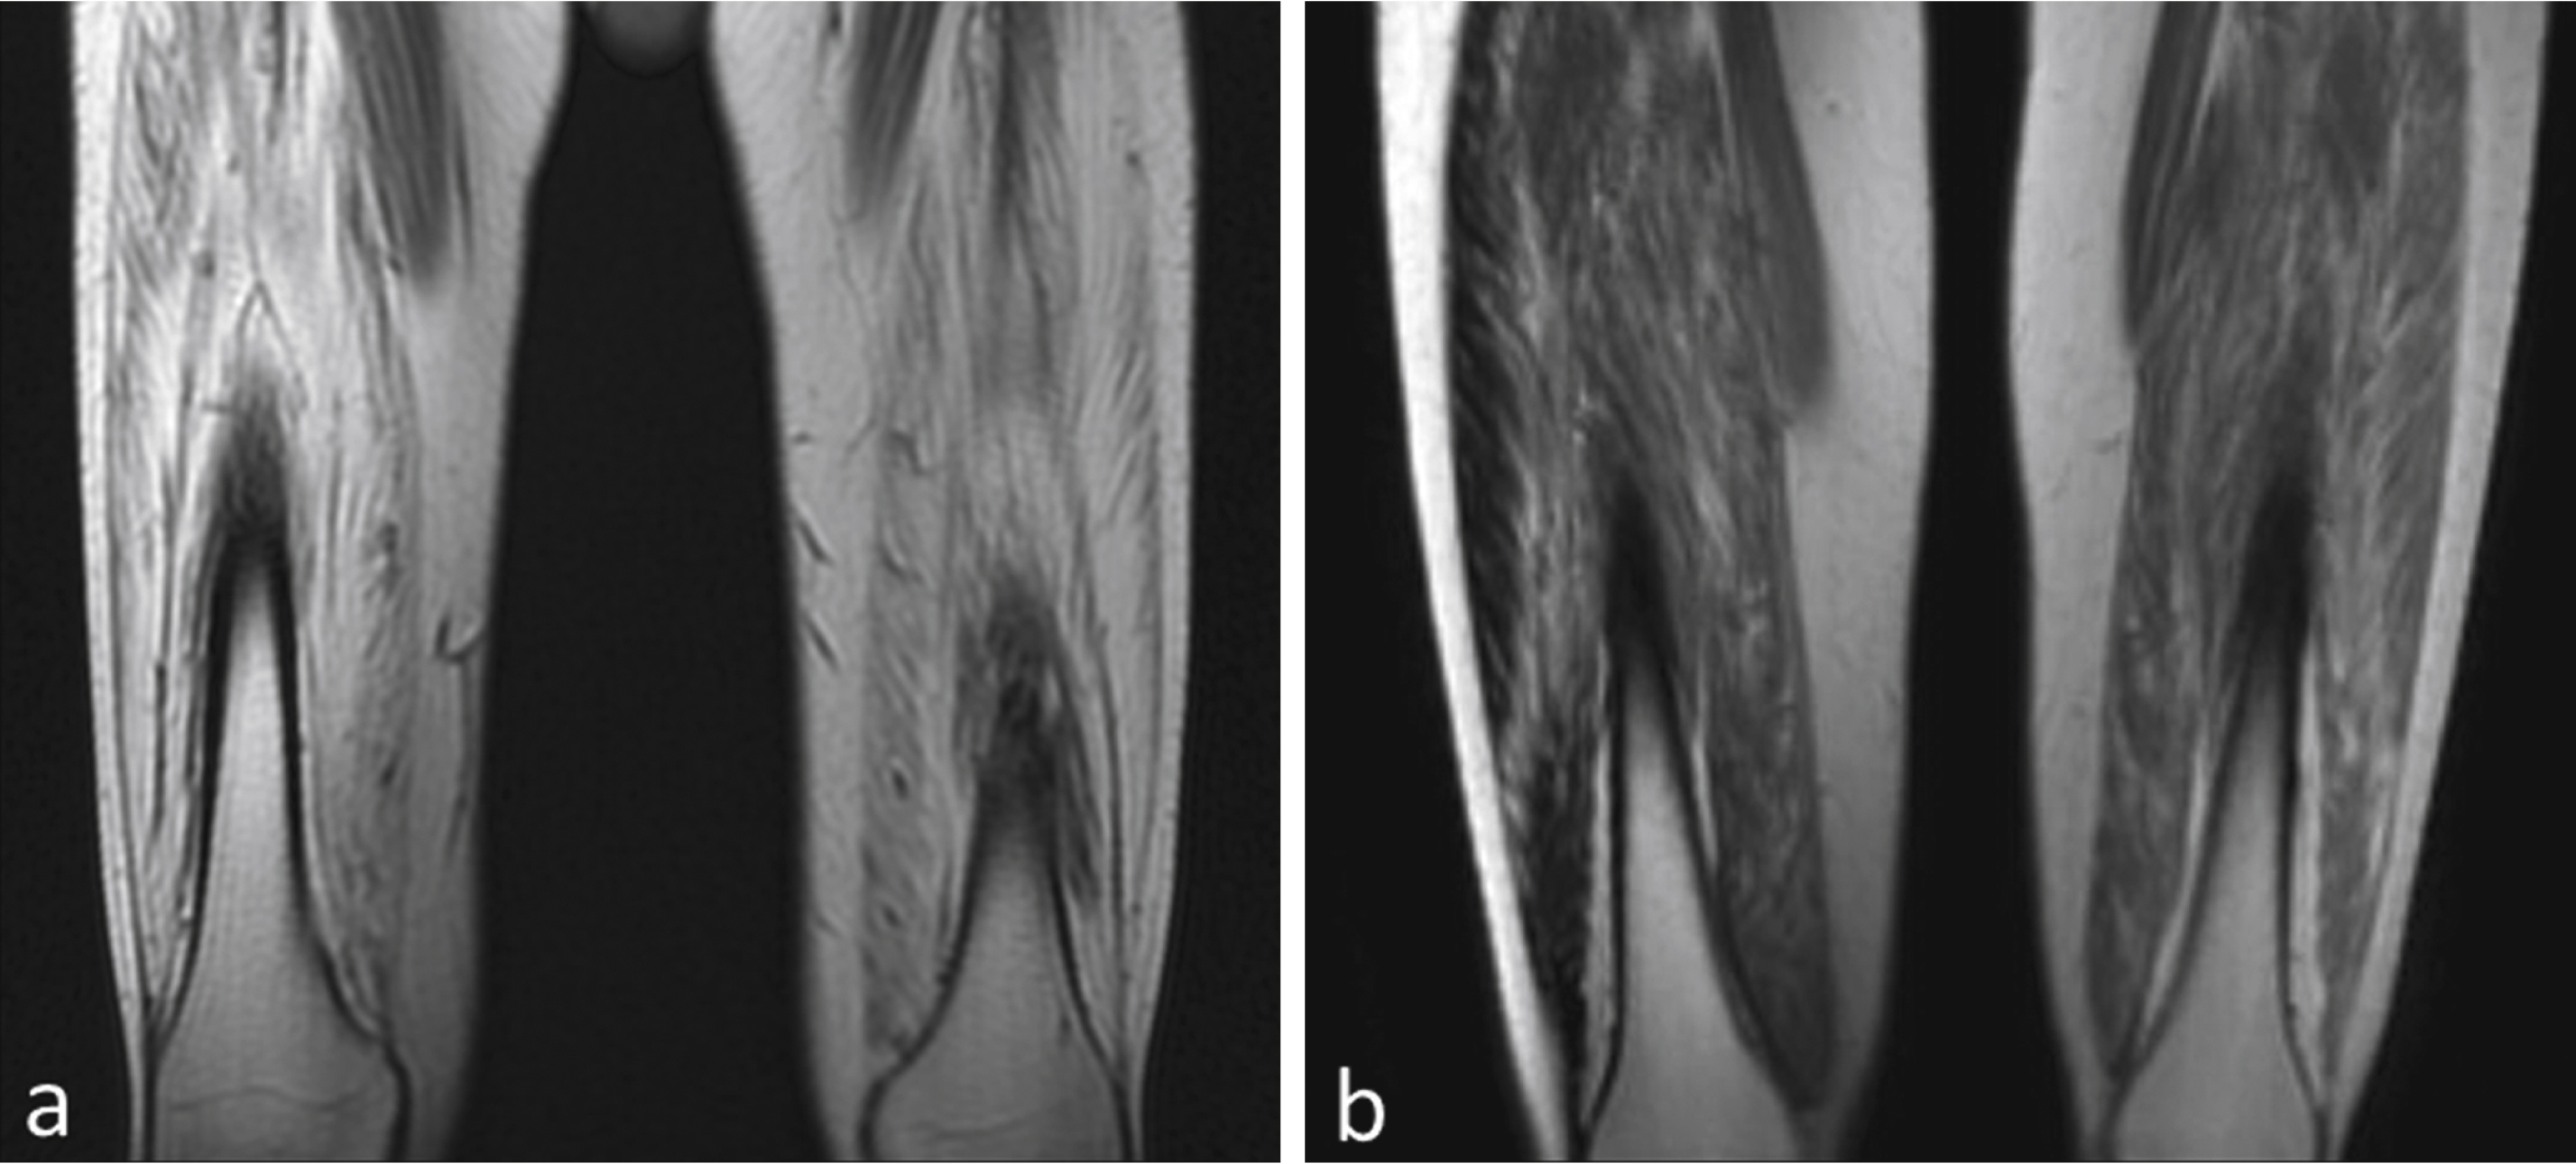 Degree of fibrosis correlates with treatment effect. (a) MRI of quadriceps muscles for the BMD patient with insignificant improvement (distance walked- 9 m on 6MWT) shows a much higher degree of skeletal muscle involvement compared to (b) the BMD subject who had most benefit (distance walked = 108 m on 6MWT).